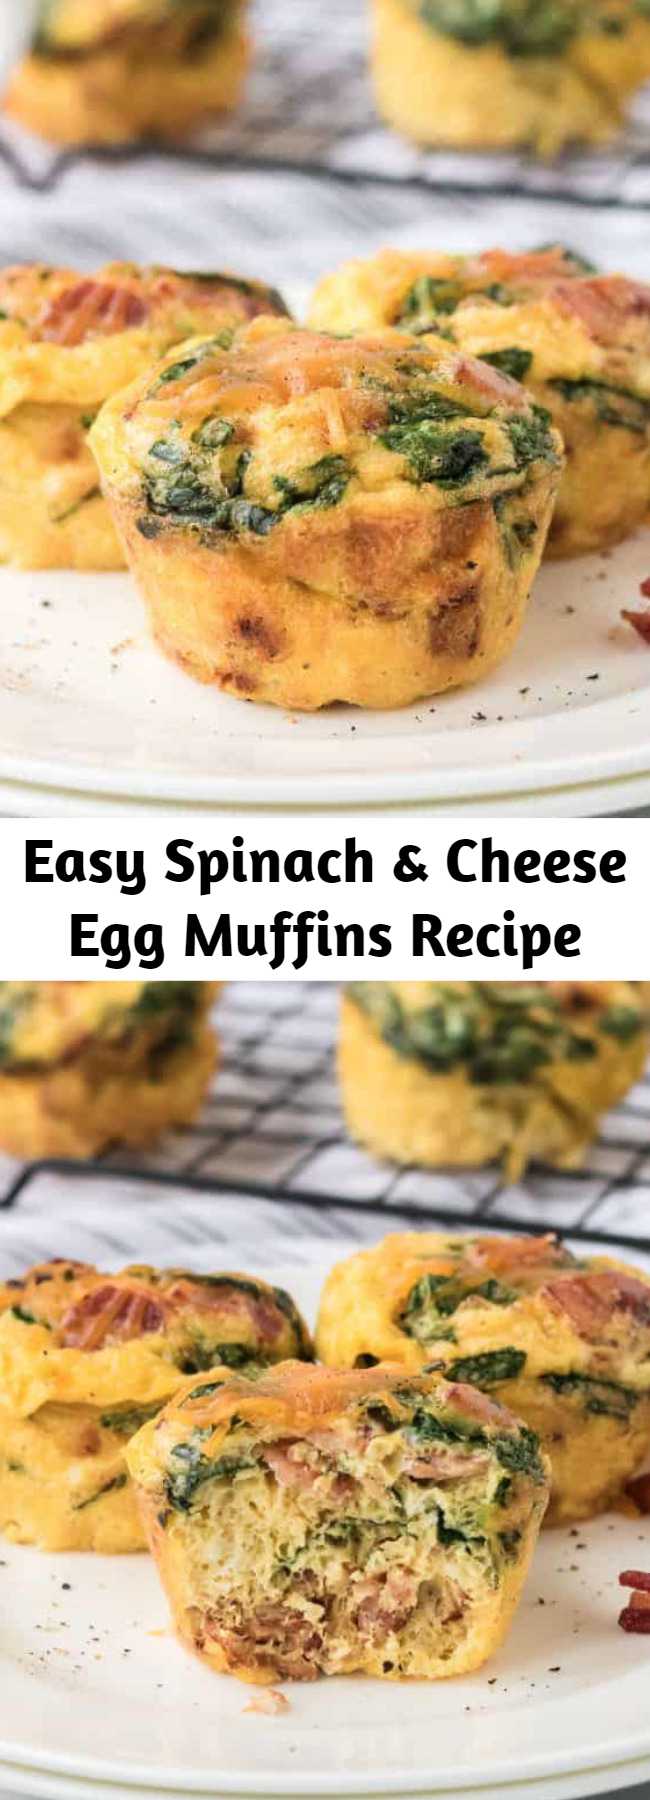 Easy Spinach & Cheese Egg Muffins Recipe - hese Spinach & Cheese Egg Muffins are a mini frittata made with bacon, onions, cheese and spinach. Always a breakfast fave! Not only was it easy to make, but it was filling and so good. I never felt like I was eating “diet food”. It almost feels too good to be true. Like how can I lose weight eating such yummy food? Yet, it happens! #eggmuffins #eggs #cheese #spinach